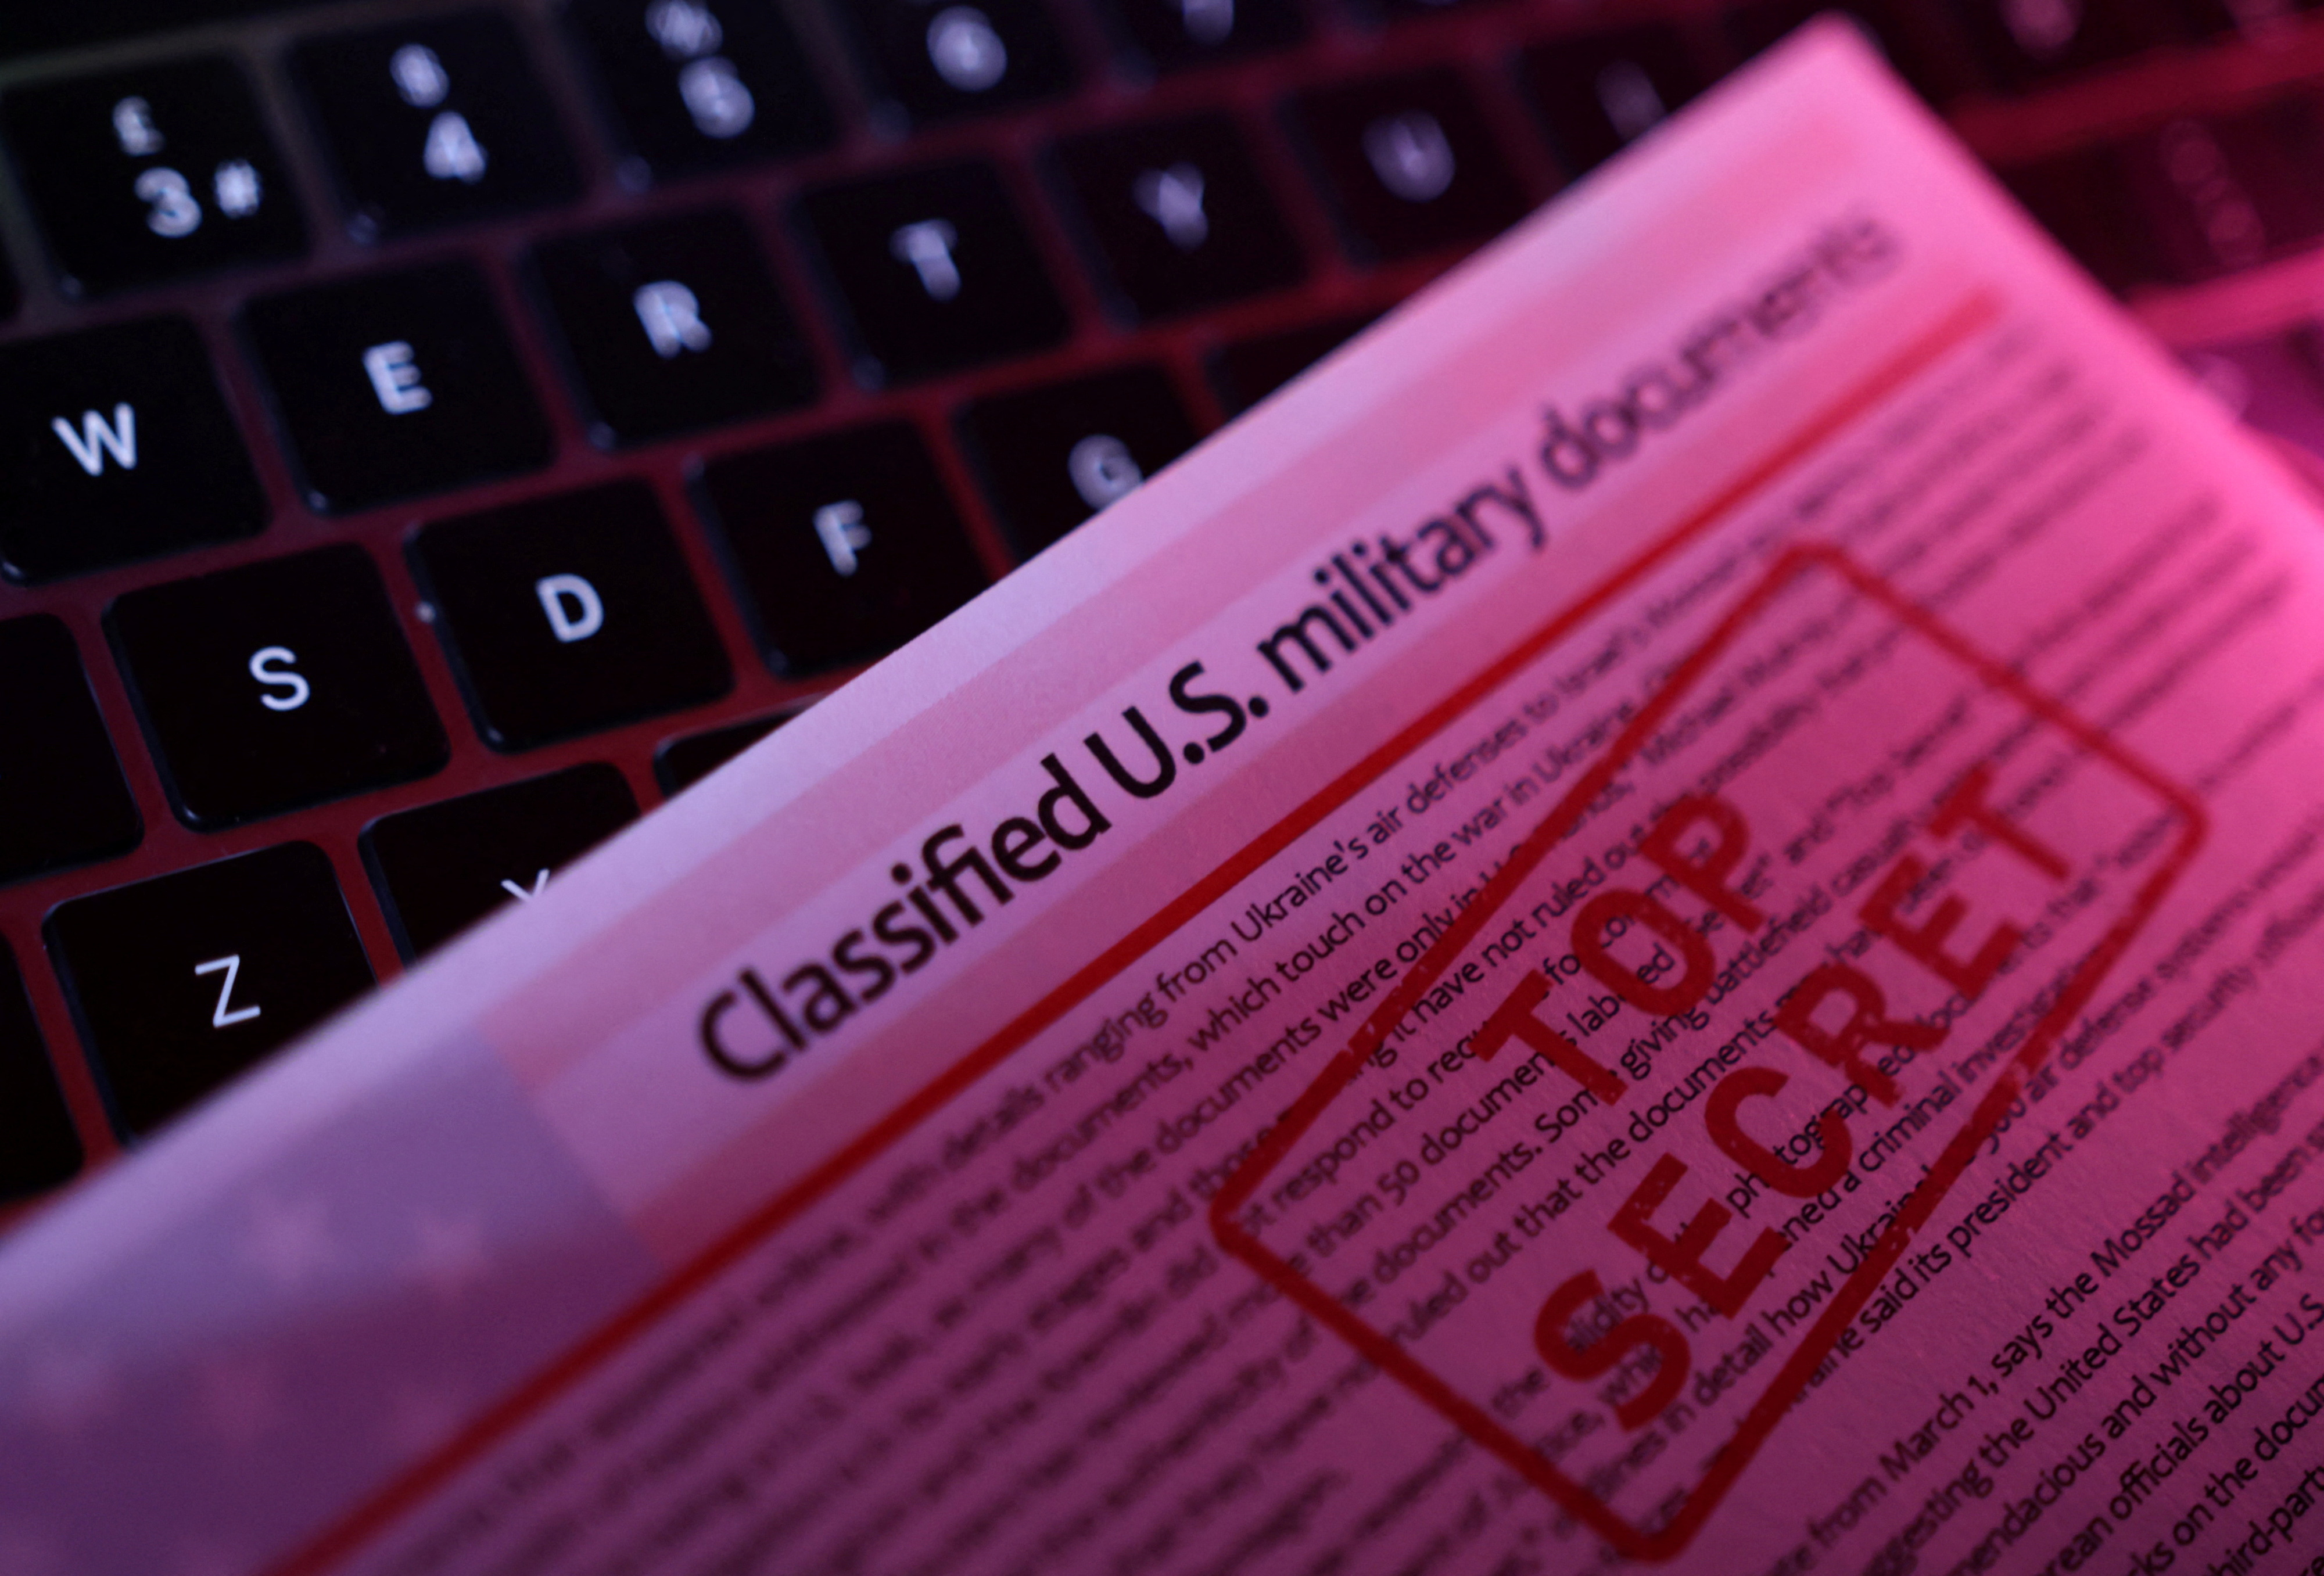 A mockup representation of classified U.S. military documents and a keyboard are seen in this illustration